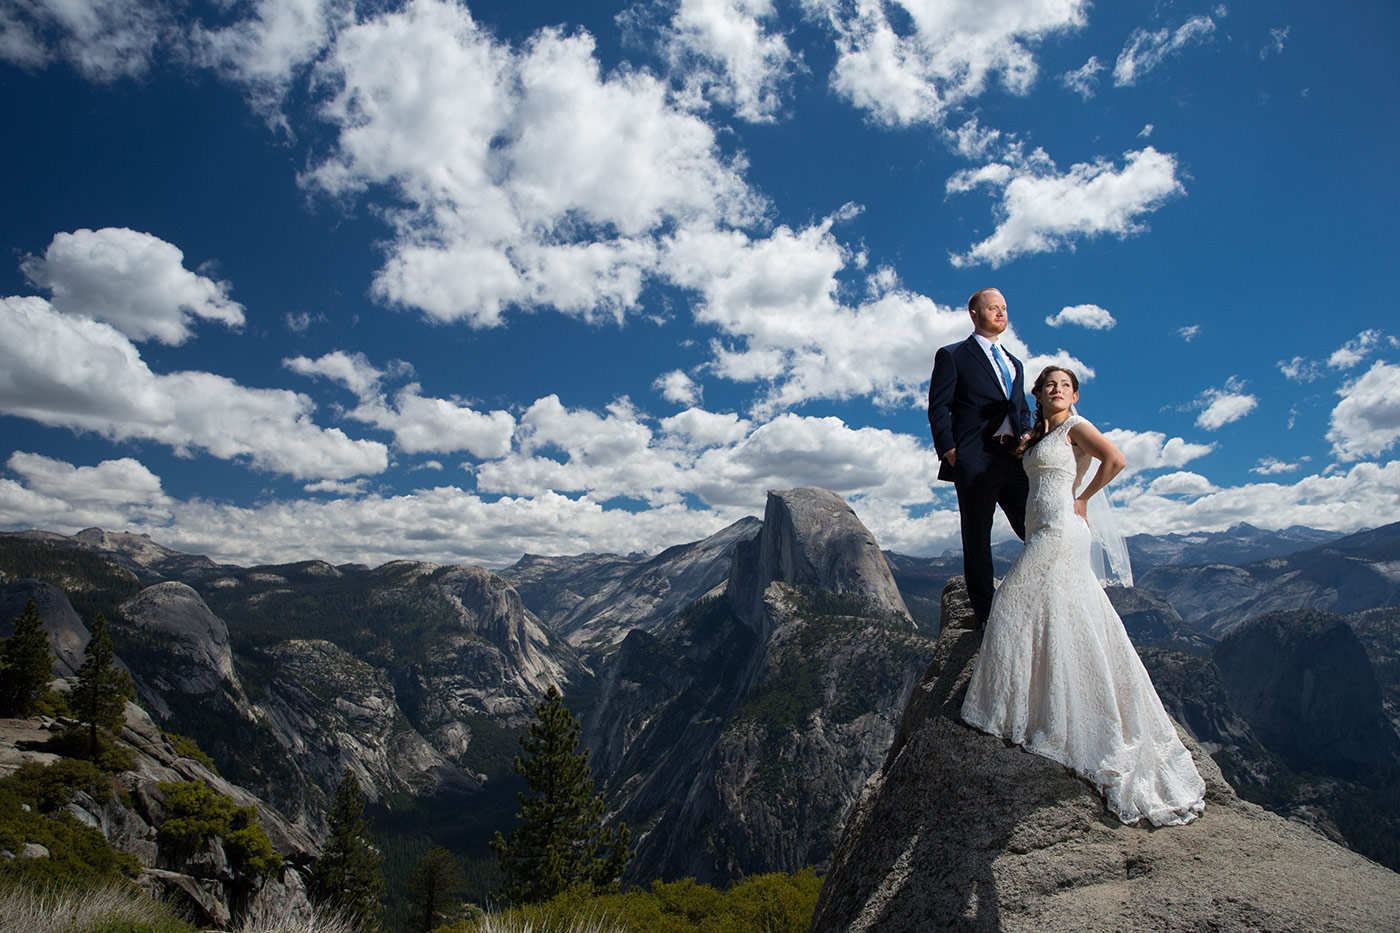 The happy couple is captured in a stunning image at Glacier Point observation point in Yosemite National Park. The bride is wearing a beautiful white wedding dress with a long train, and the groom is dressed in a stylish gray suit. They are standing at the edge of a cliff, with a breathtaking view of the Yosemite Valley and Half Dome in the background. The sun is setting, casting a warm glow on the couple and the surrounding landscape. A few wispy clouds are visible in the sky, adding to the natural beauty of the scene. This image captures the beauty and romance of a wedding held in the midst of one of America's most iconic national parks.
